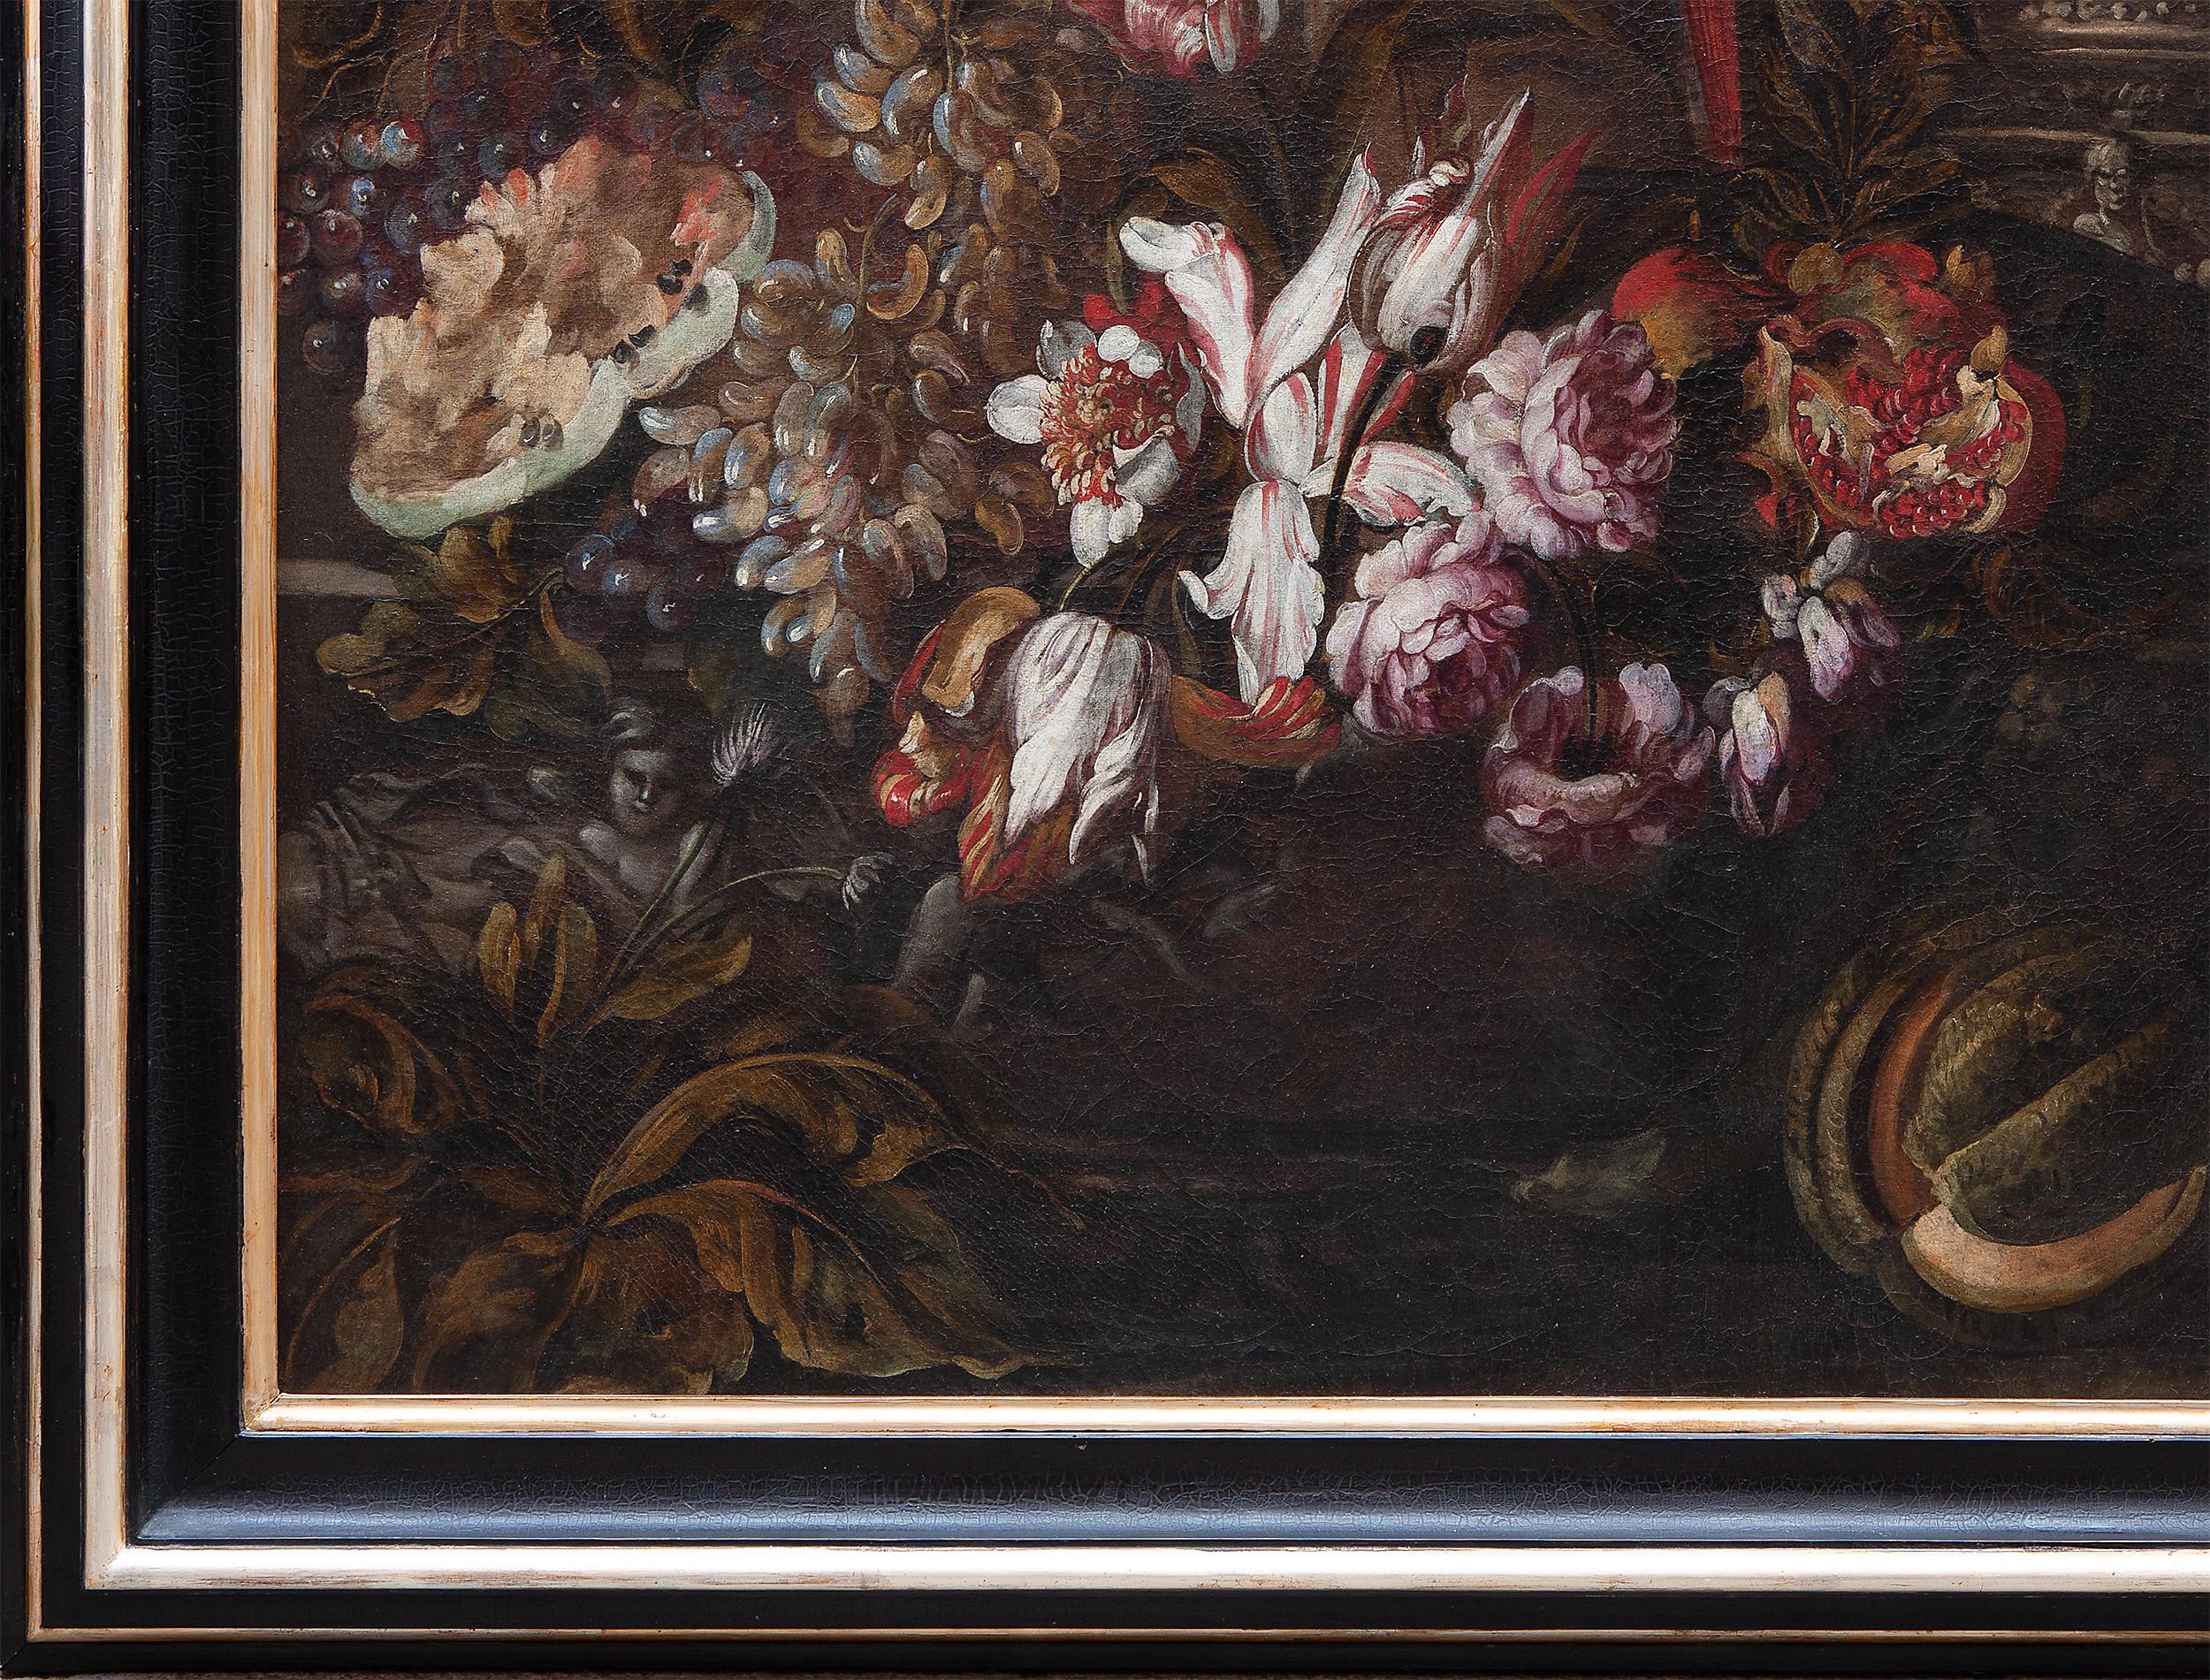 Still life with flowers, fruits, historiated vases, a parrot and a monkey  - Painting by Unknown